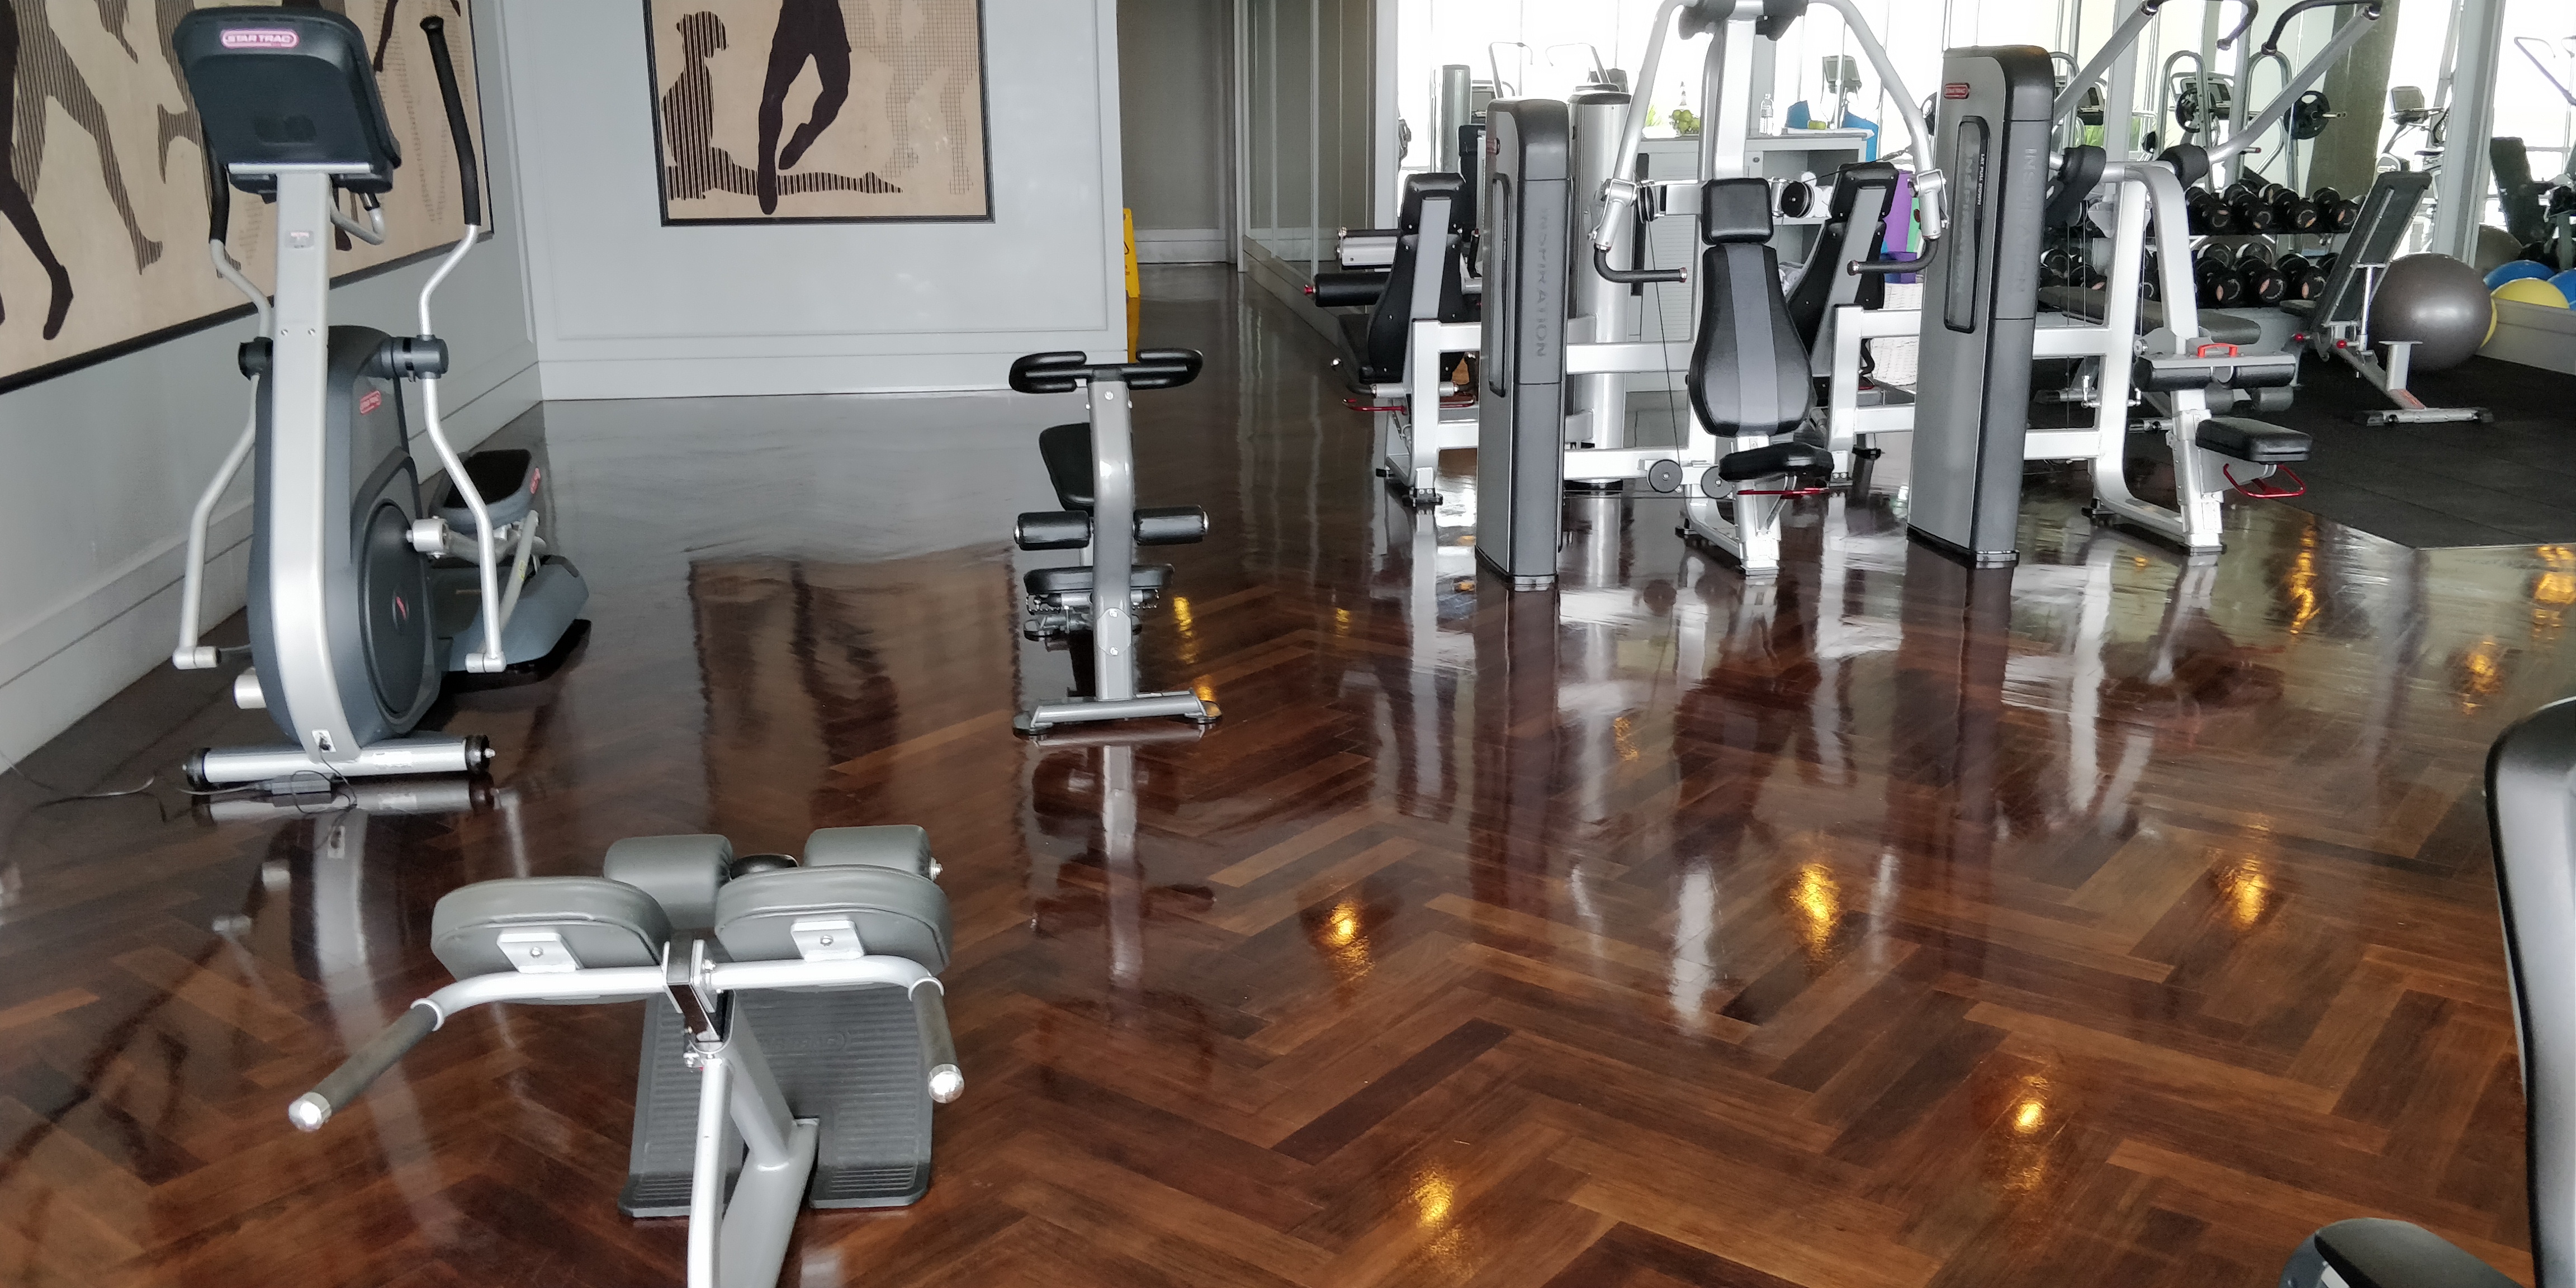 A PICTURE OF THE MAIN FLOOR OF THE GYM